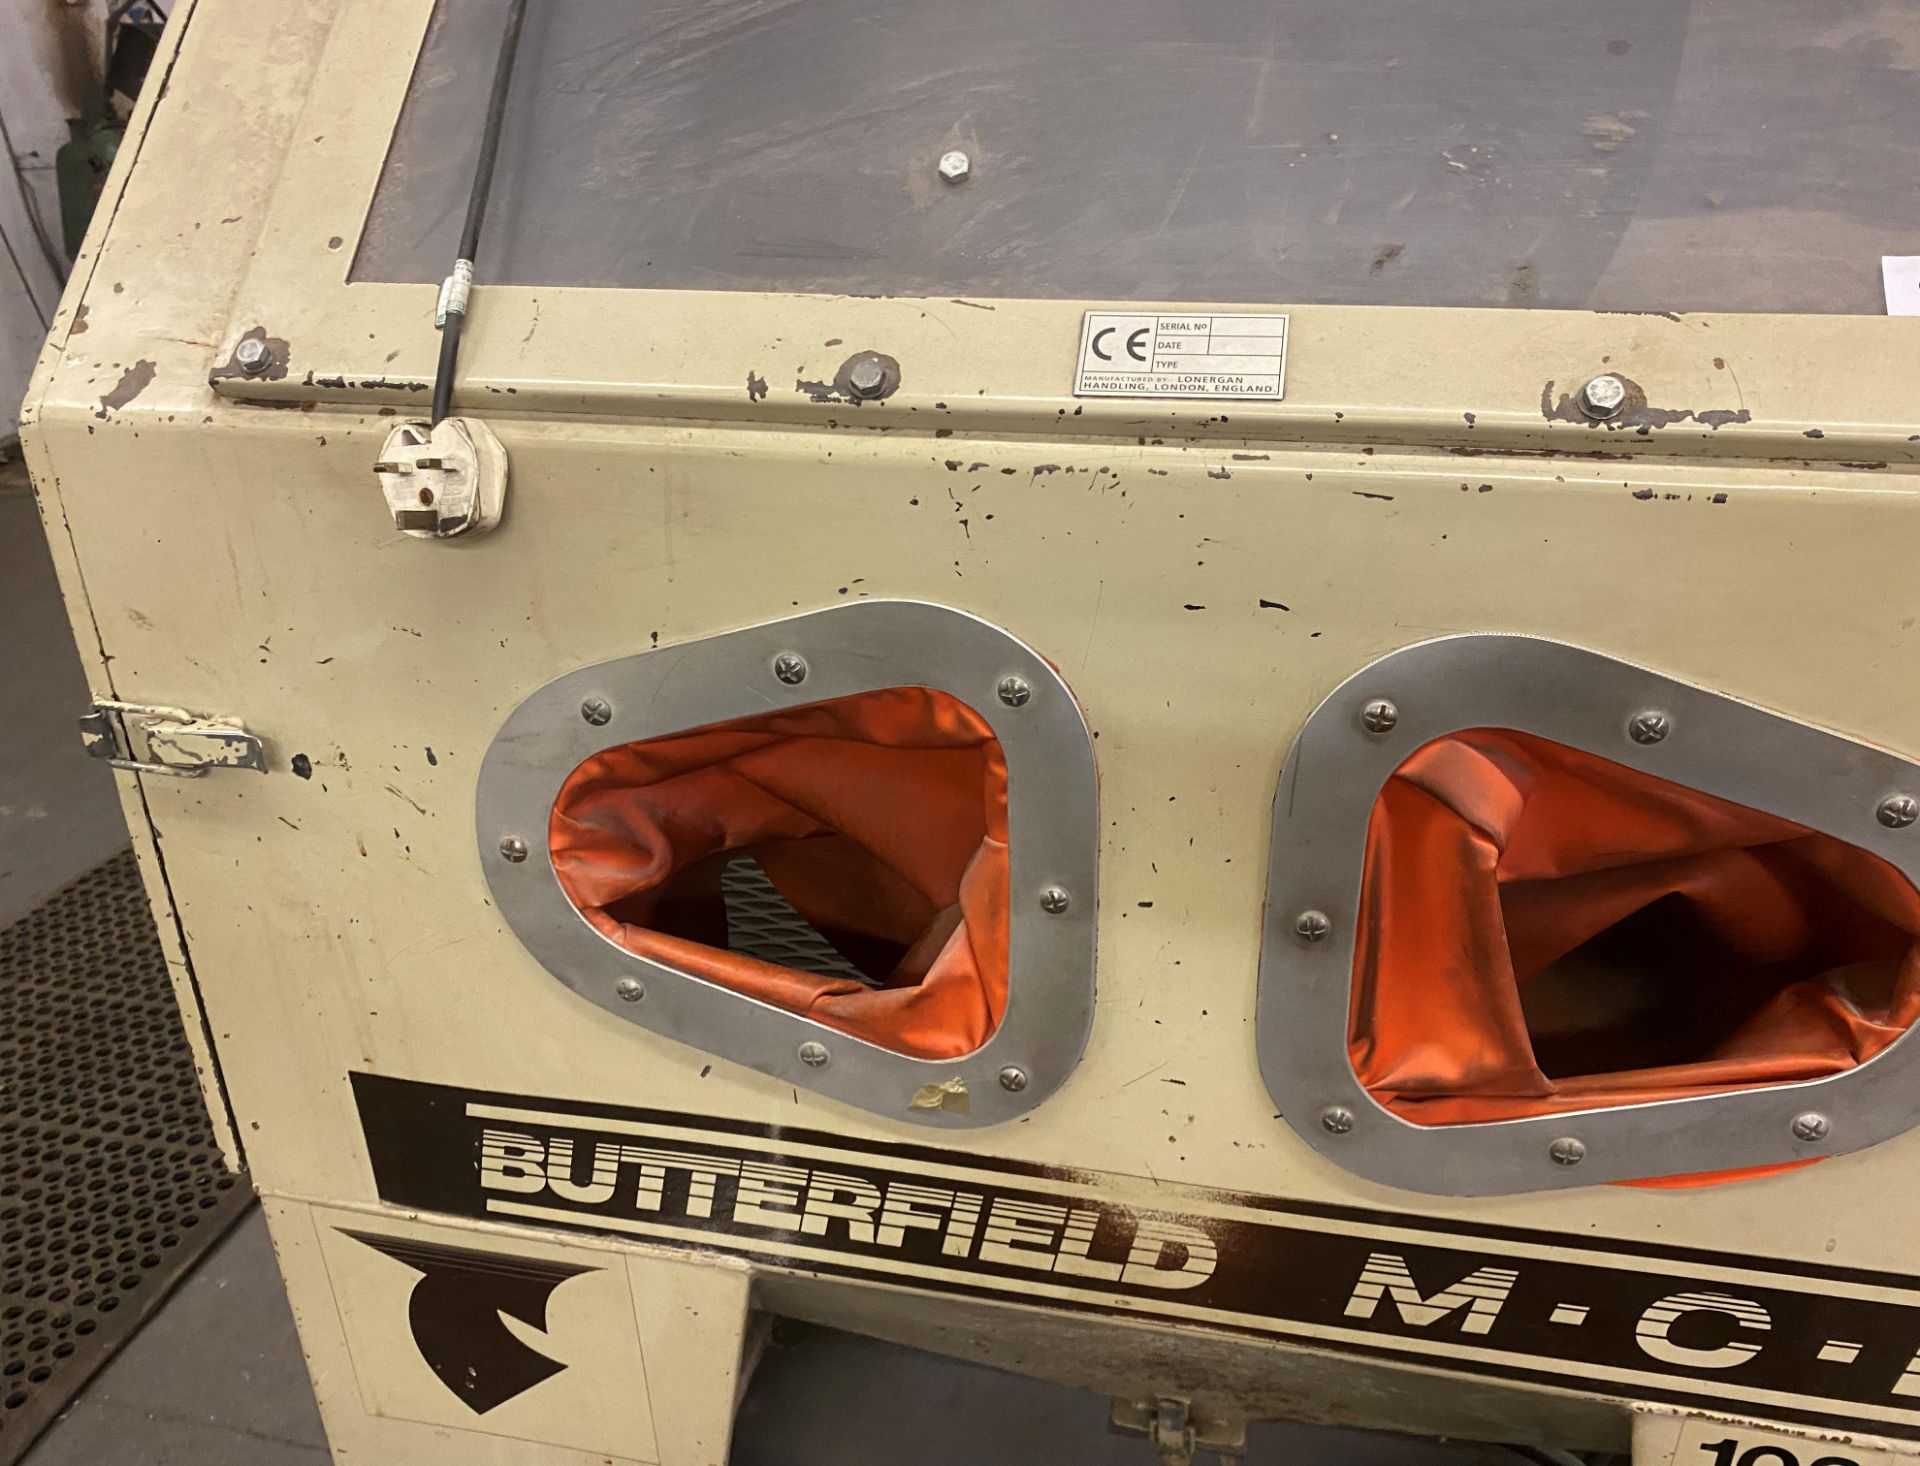 1 x Butterfield Mcr 103 Large Freestanding Shot Blasting Cabinet - Ref: C2C025 - CL789 - Location: - Image 4 of 4